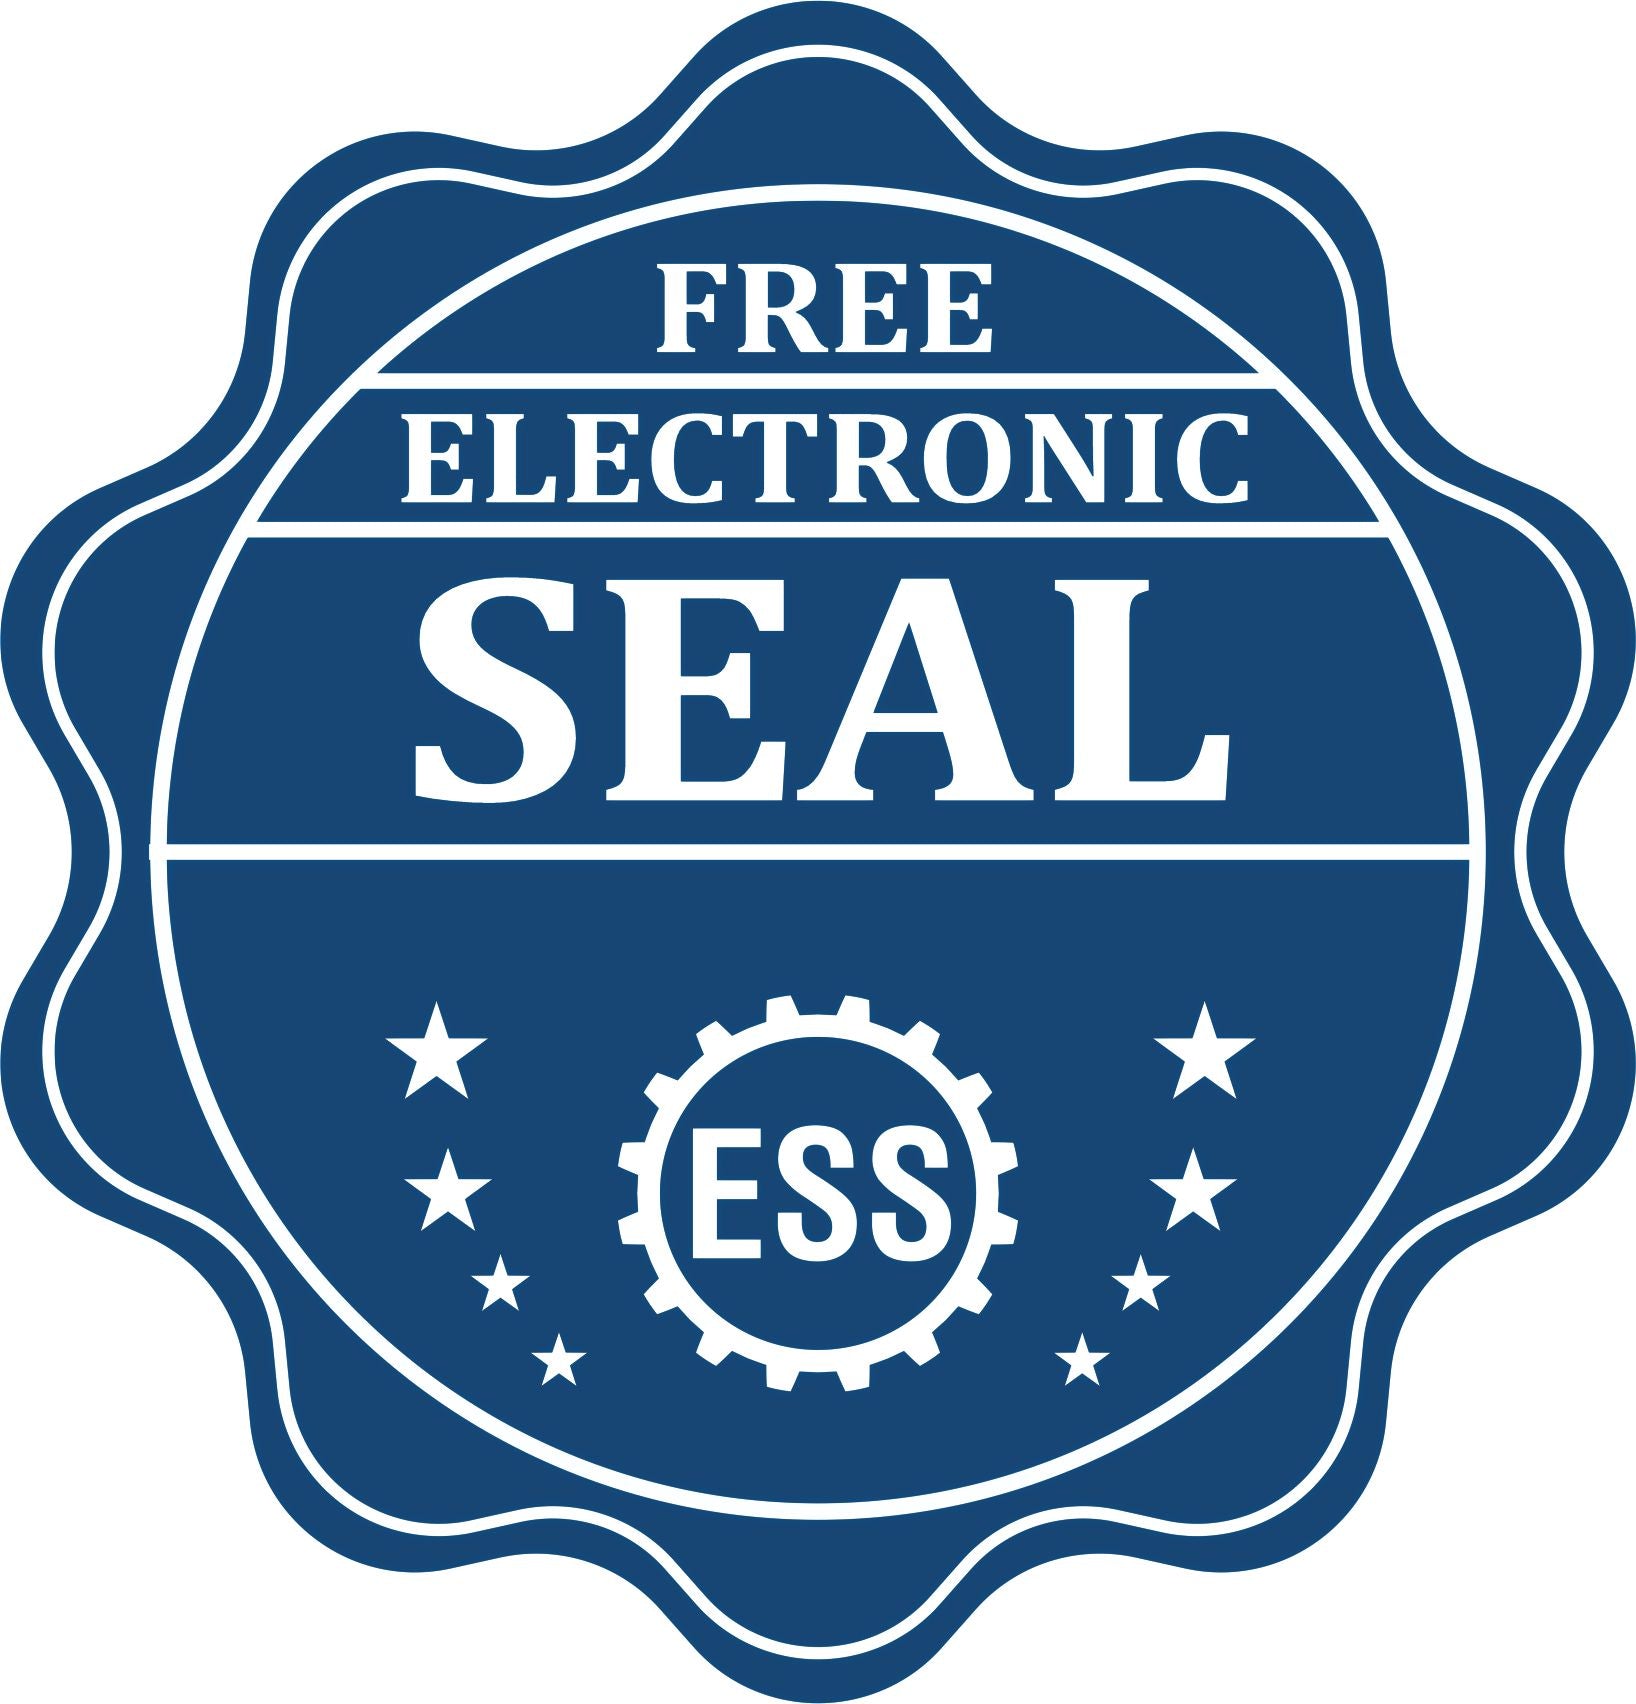 A badge showing a free electronic seal for the Hybrid West Virginia Land Surveyor Seal with stars and the ESS gear on the emblem.